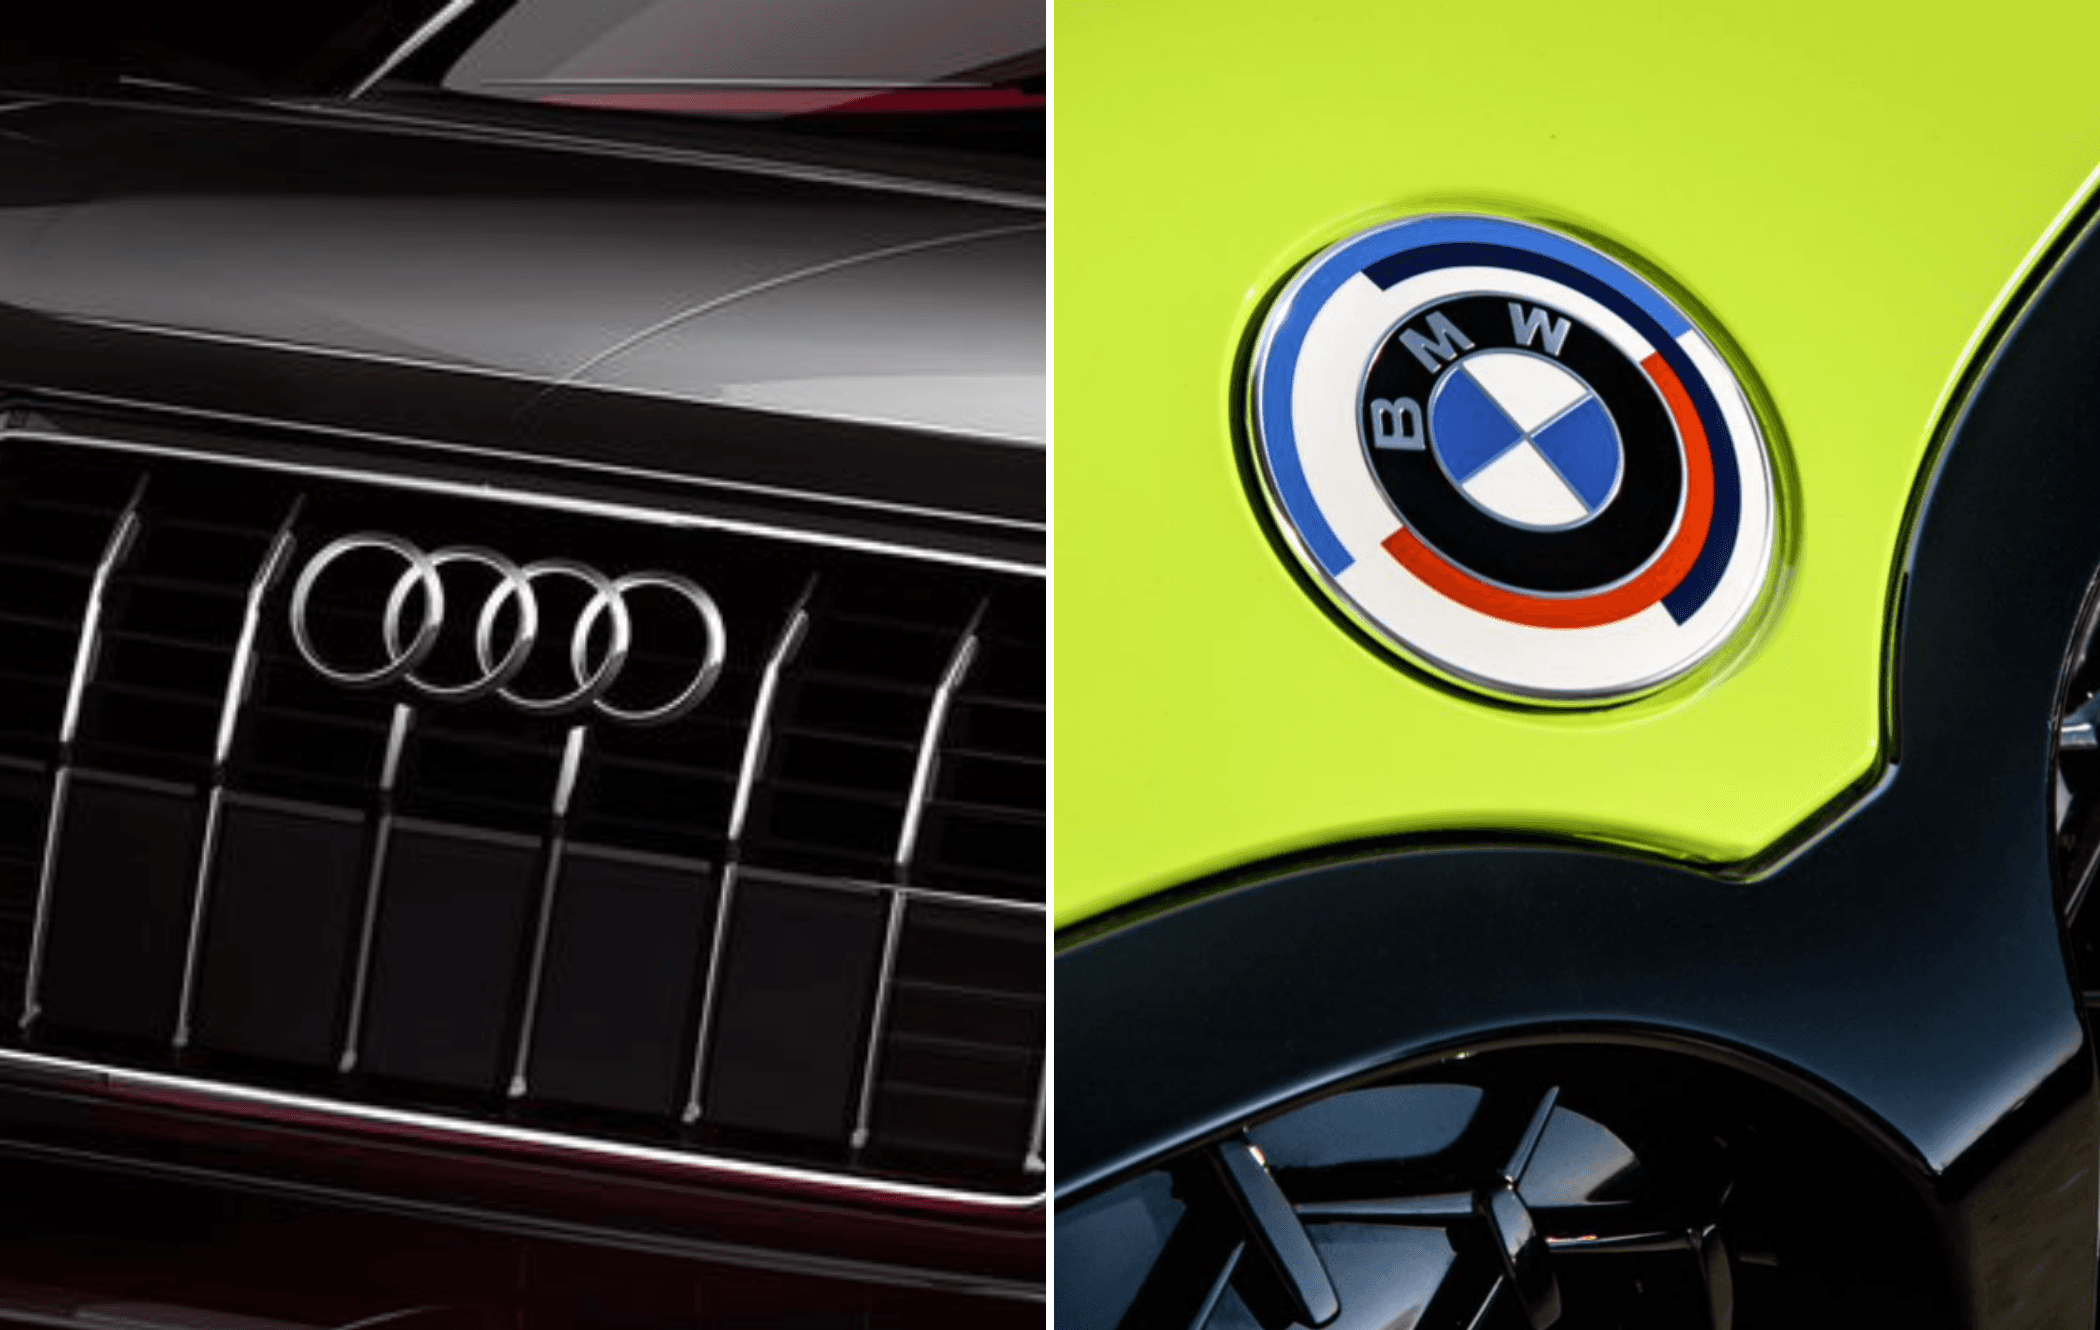 A side-by-side of the Audi and BMW car logos